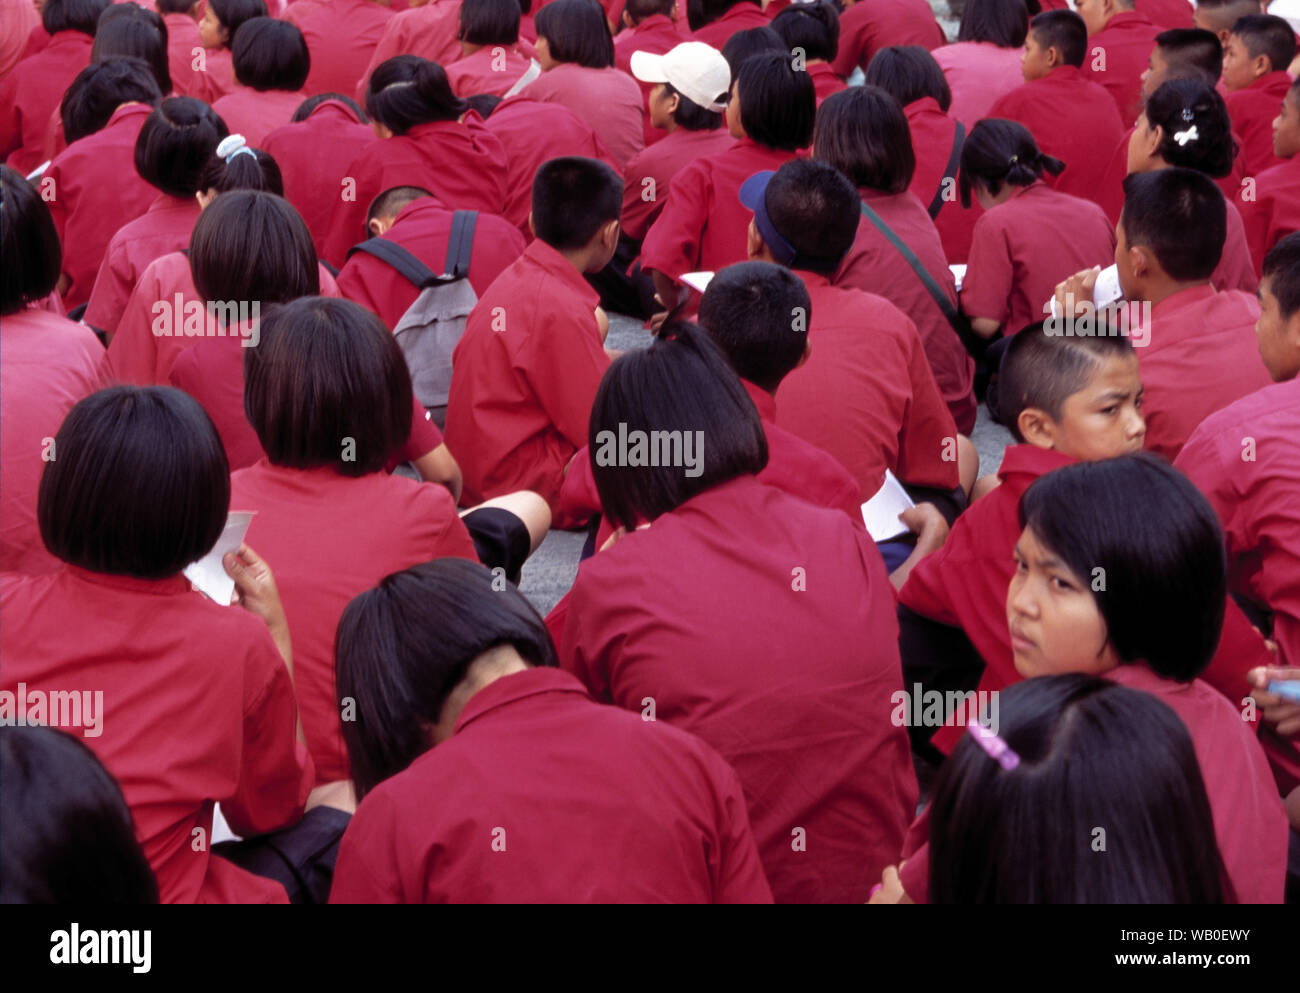 asia, asian, thailand, large group of young people dressed in uniforms in prayer Stock Photo